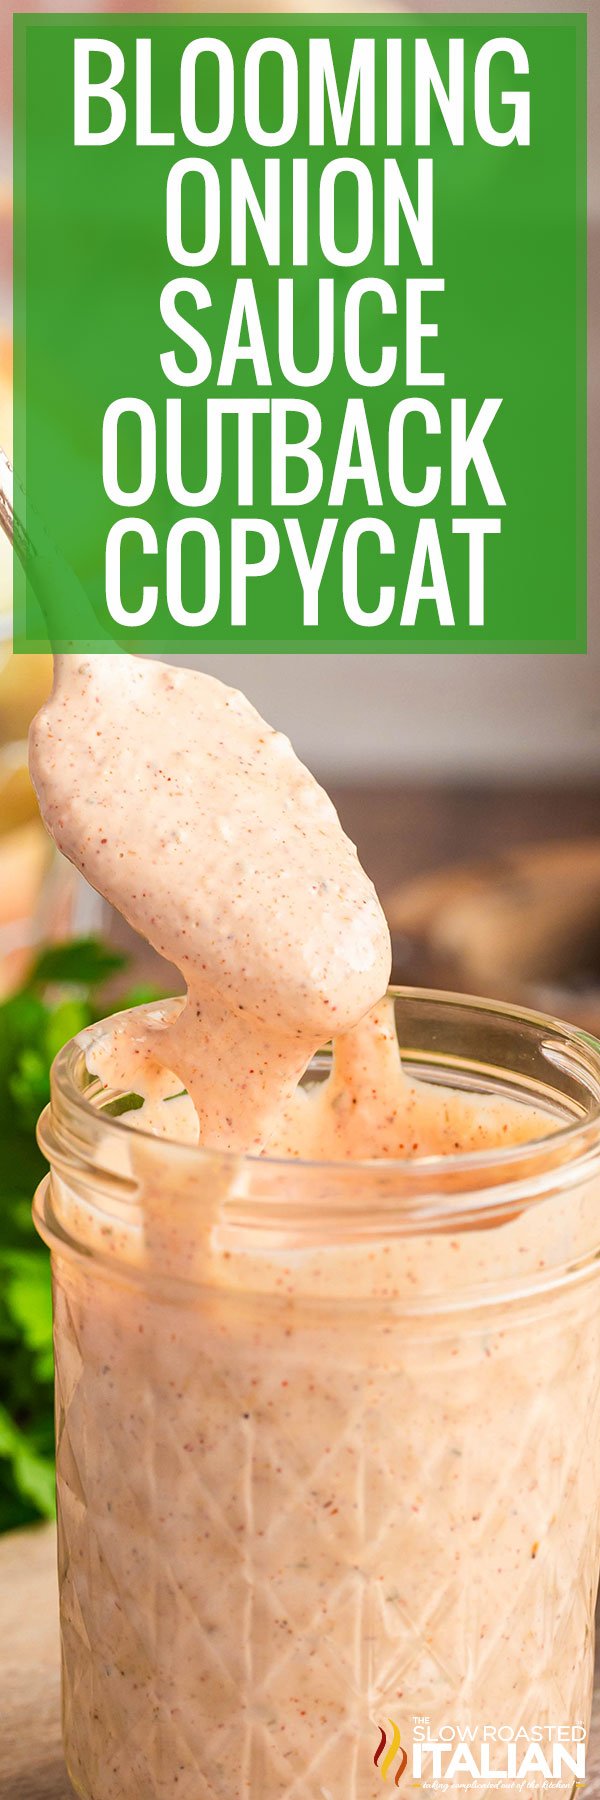 Blooming Onion Sauce (Outback Copycat) - PIN